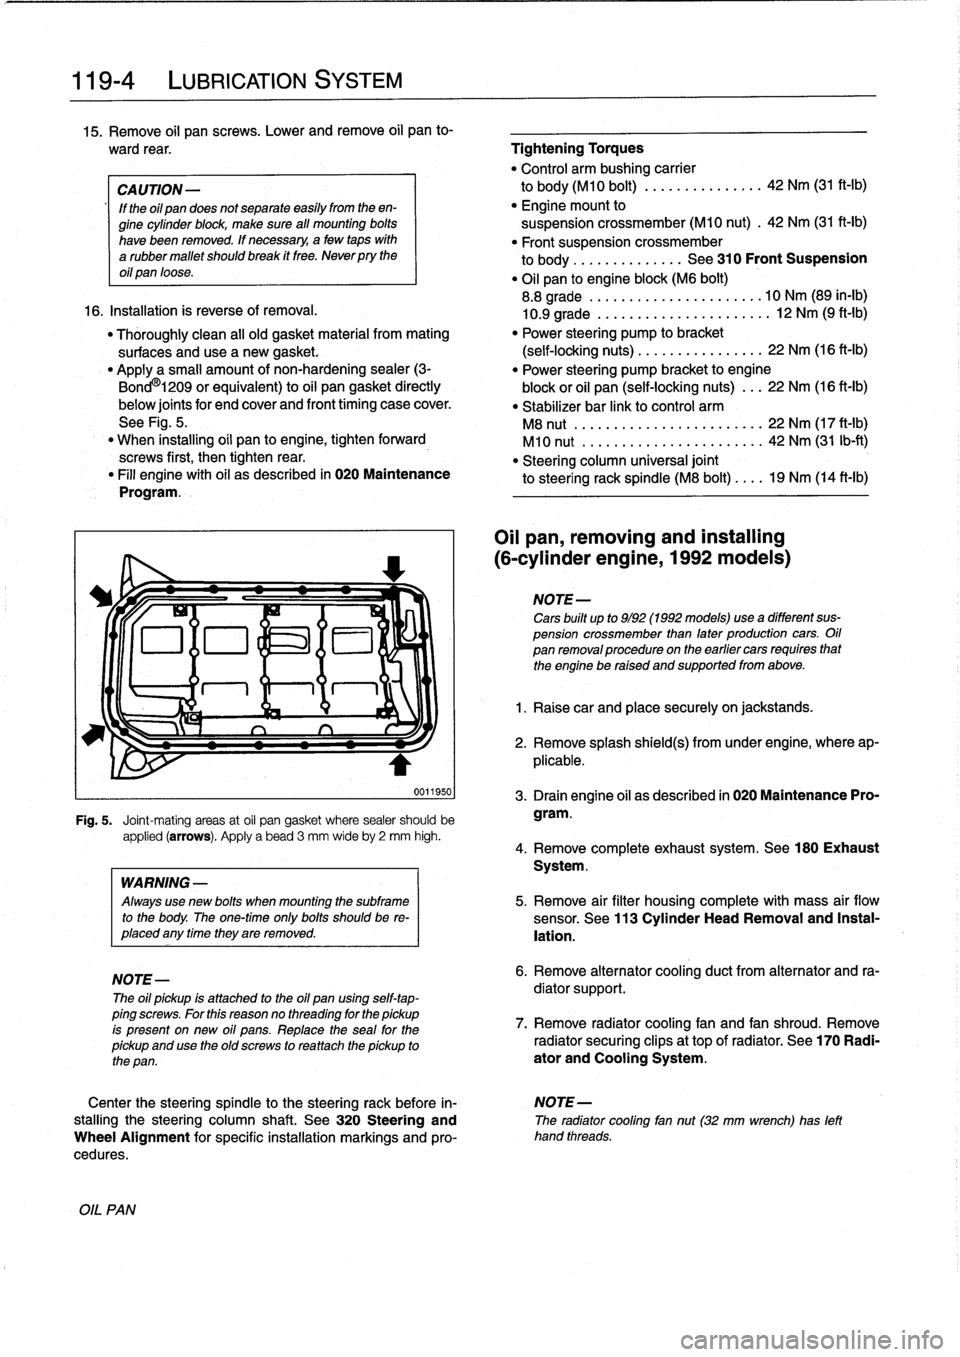 BMW 328i 1994 E36 Workshop Manual 
119-
4

	

LUBRICATION
SYSTEM

15
.
Remove
oil
pan
screws
.
Lower
andremove
oil
pan
to-

ward
rear
.

	

Tightening
Torques

"
Control
arm
bushing
carrier

CAUTION-

	

to
body(M10
bolt)
............